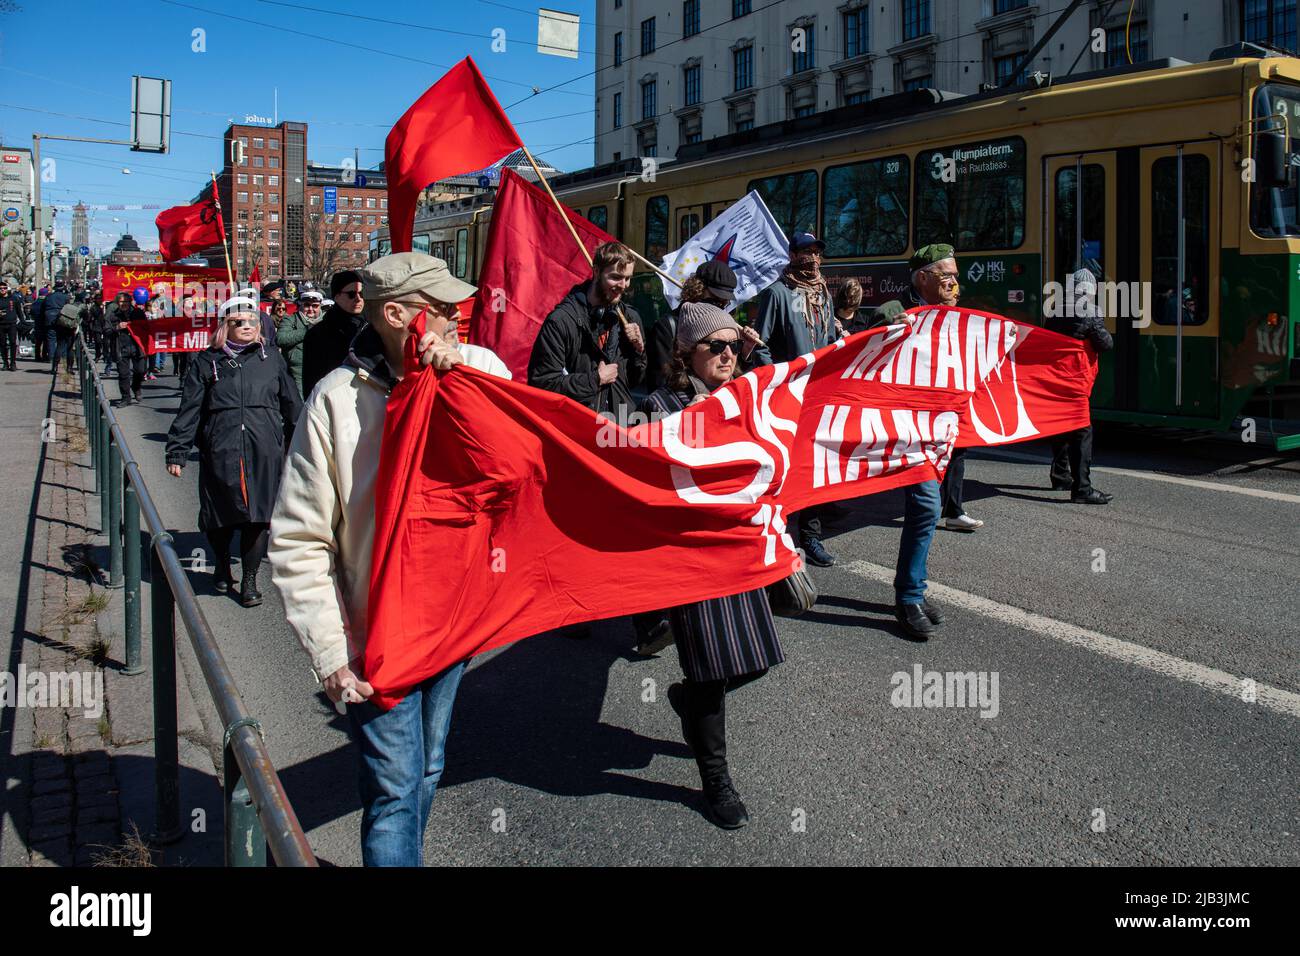 People holding a red banner and marching at socialist May Day parade in International Workers' Day in Helsinki, Finland Stock Photo